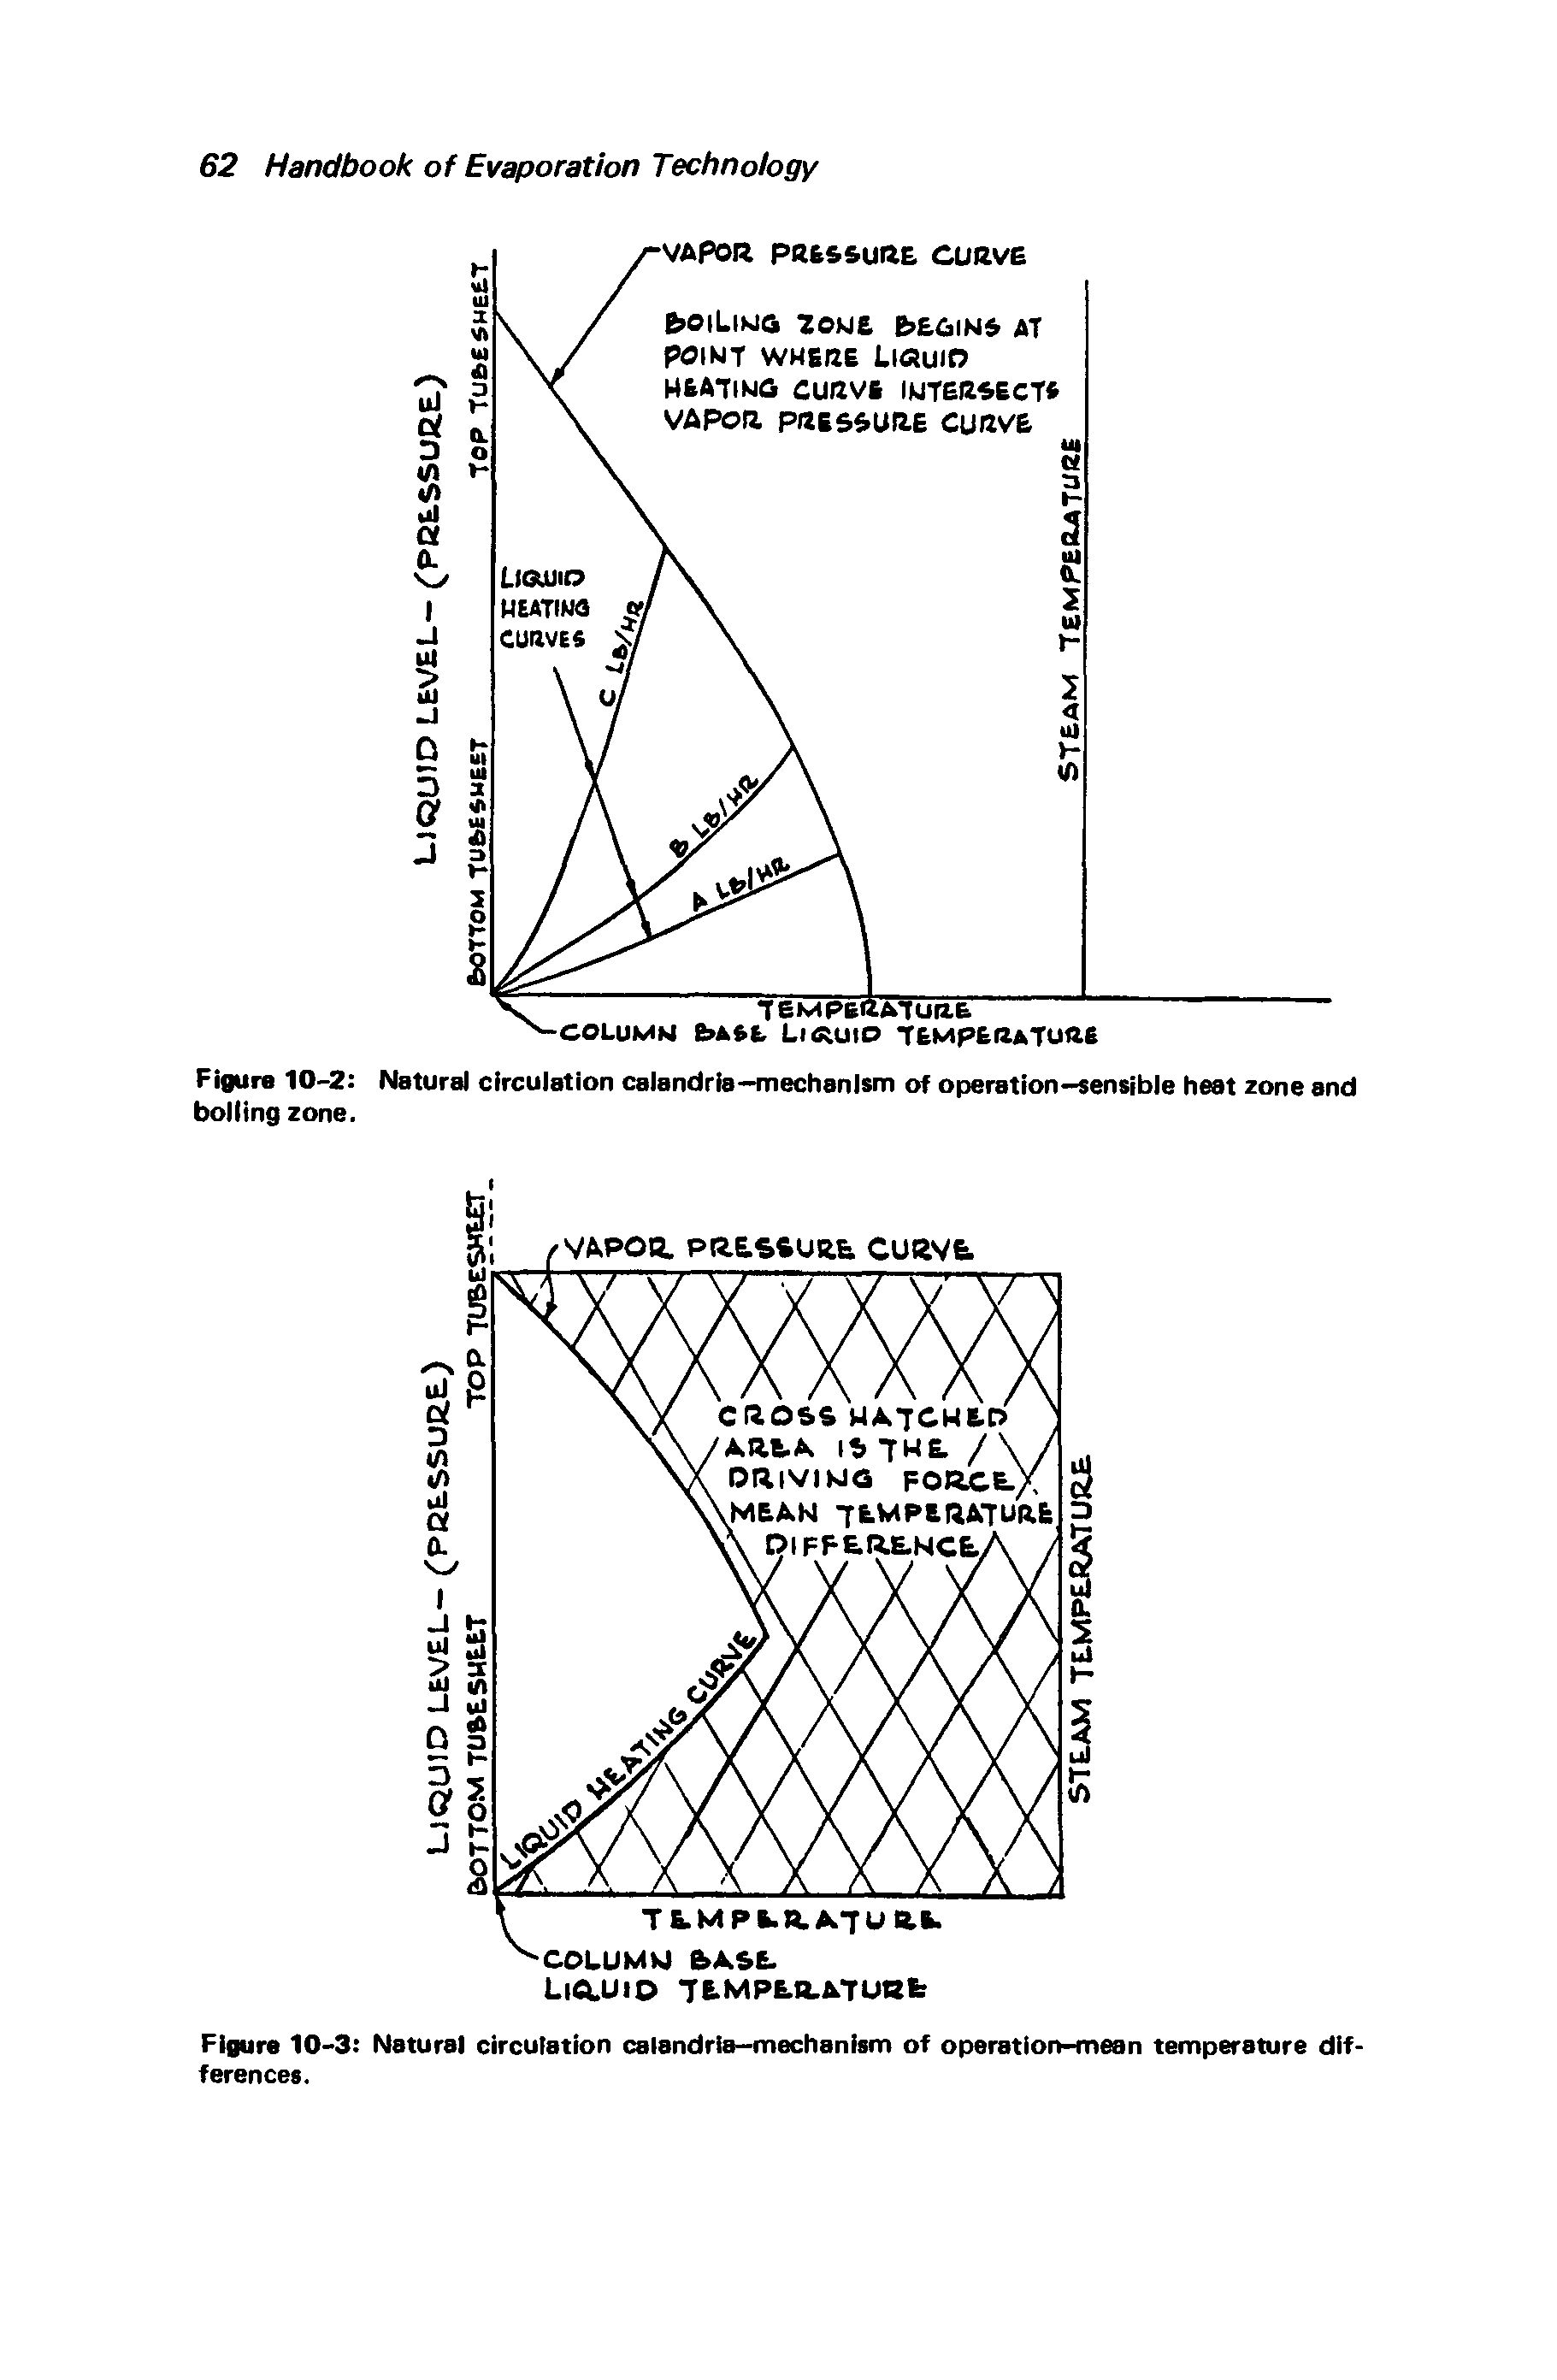 Figure 10-3 Natural circulation calandria-mechanism of operation-mean temperature differences.